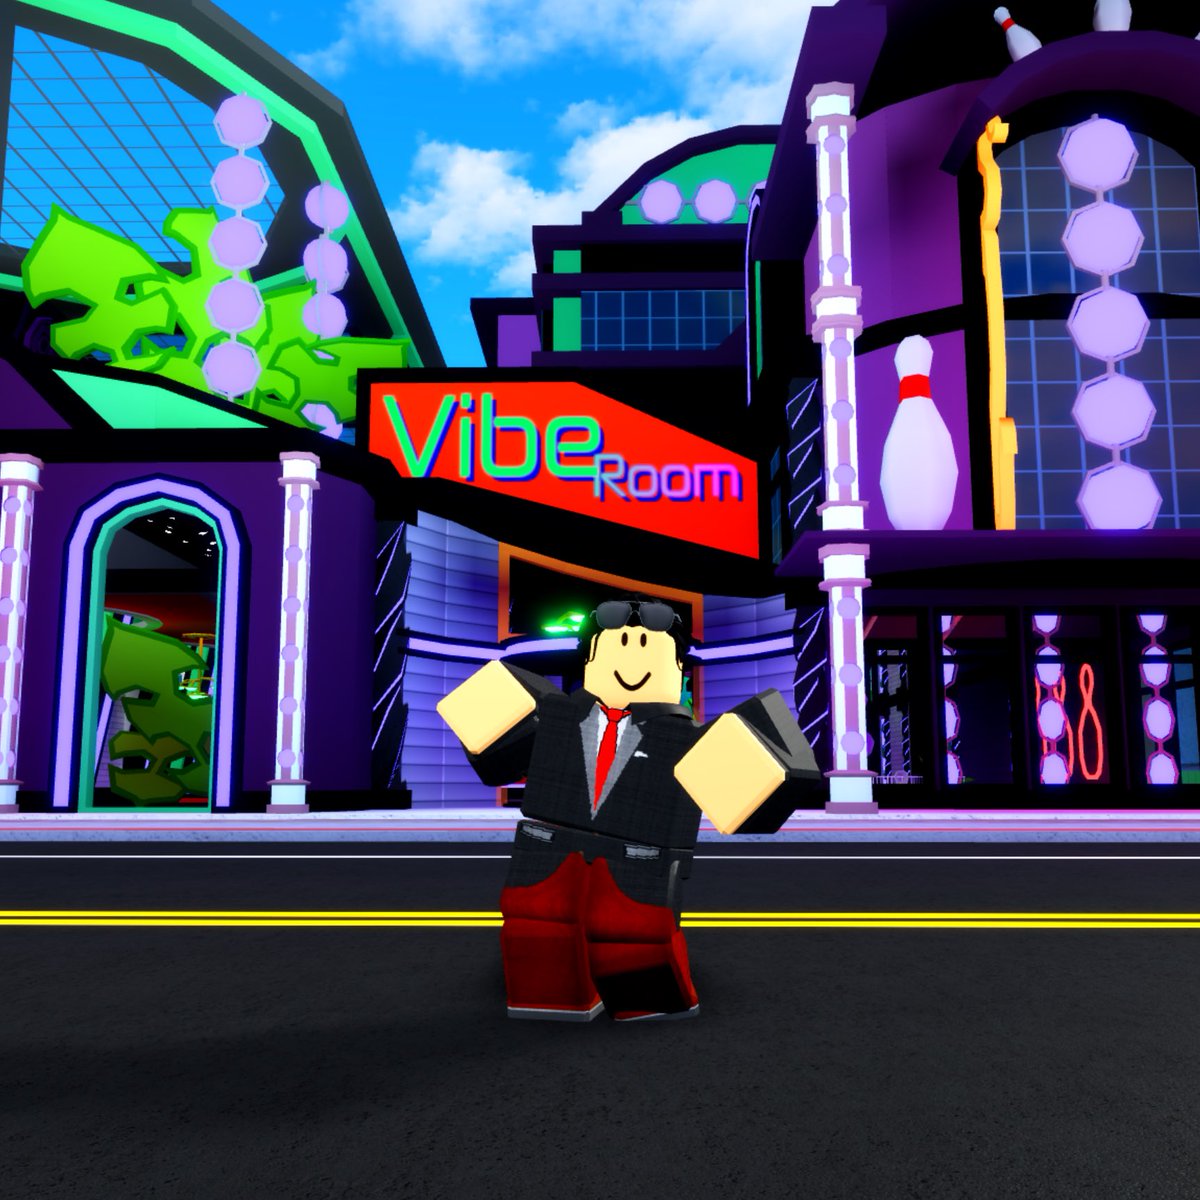 Robloxian High School On Twitter I Know You Have All Been Holding Your Breath But The Official Name Is Drum Roll Please Vibe Room Hold Onto Your Hats This Next Update - roblox robloxian high school twitter